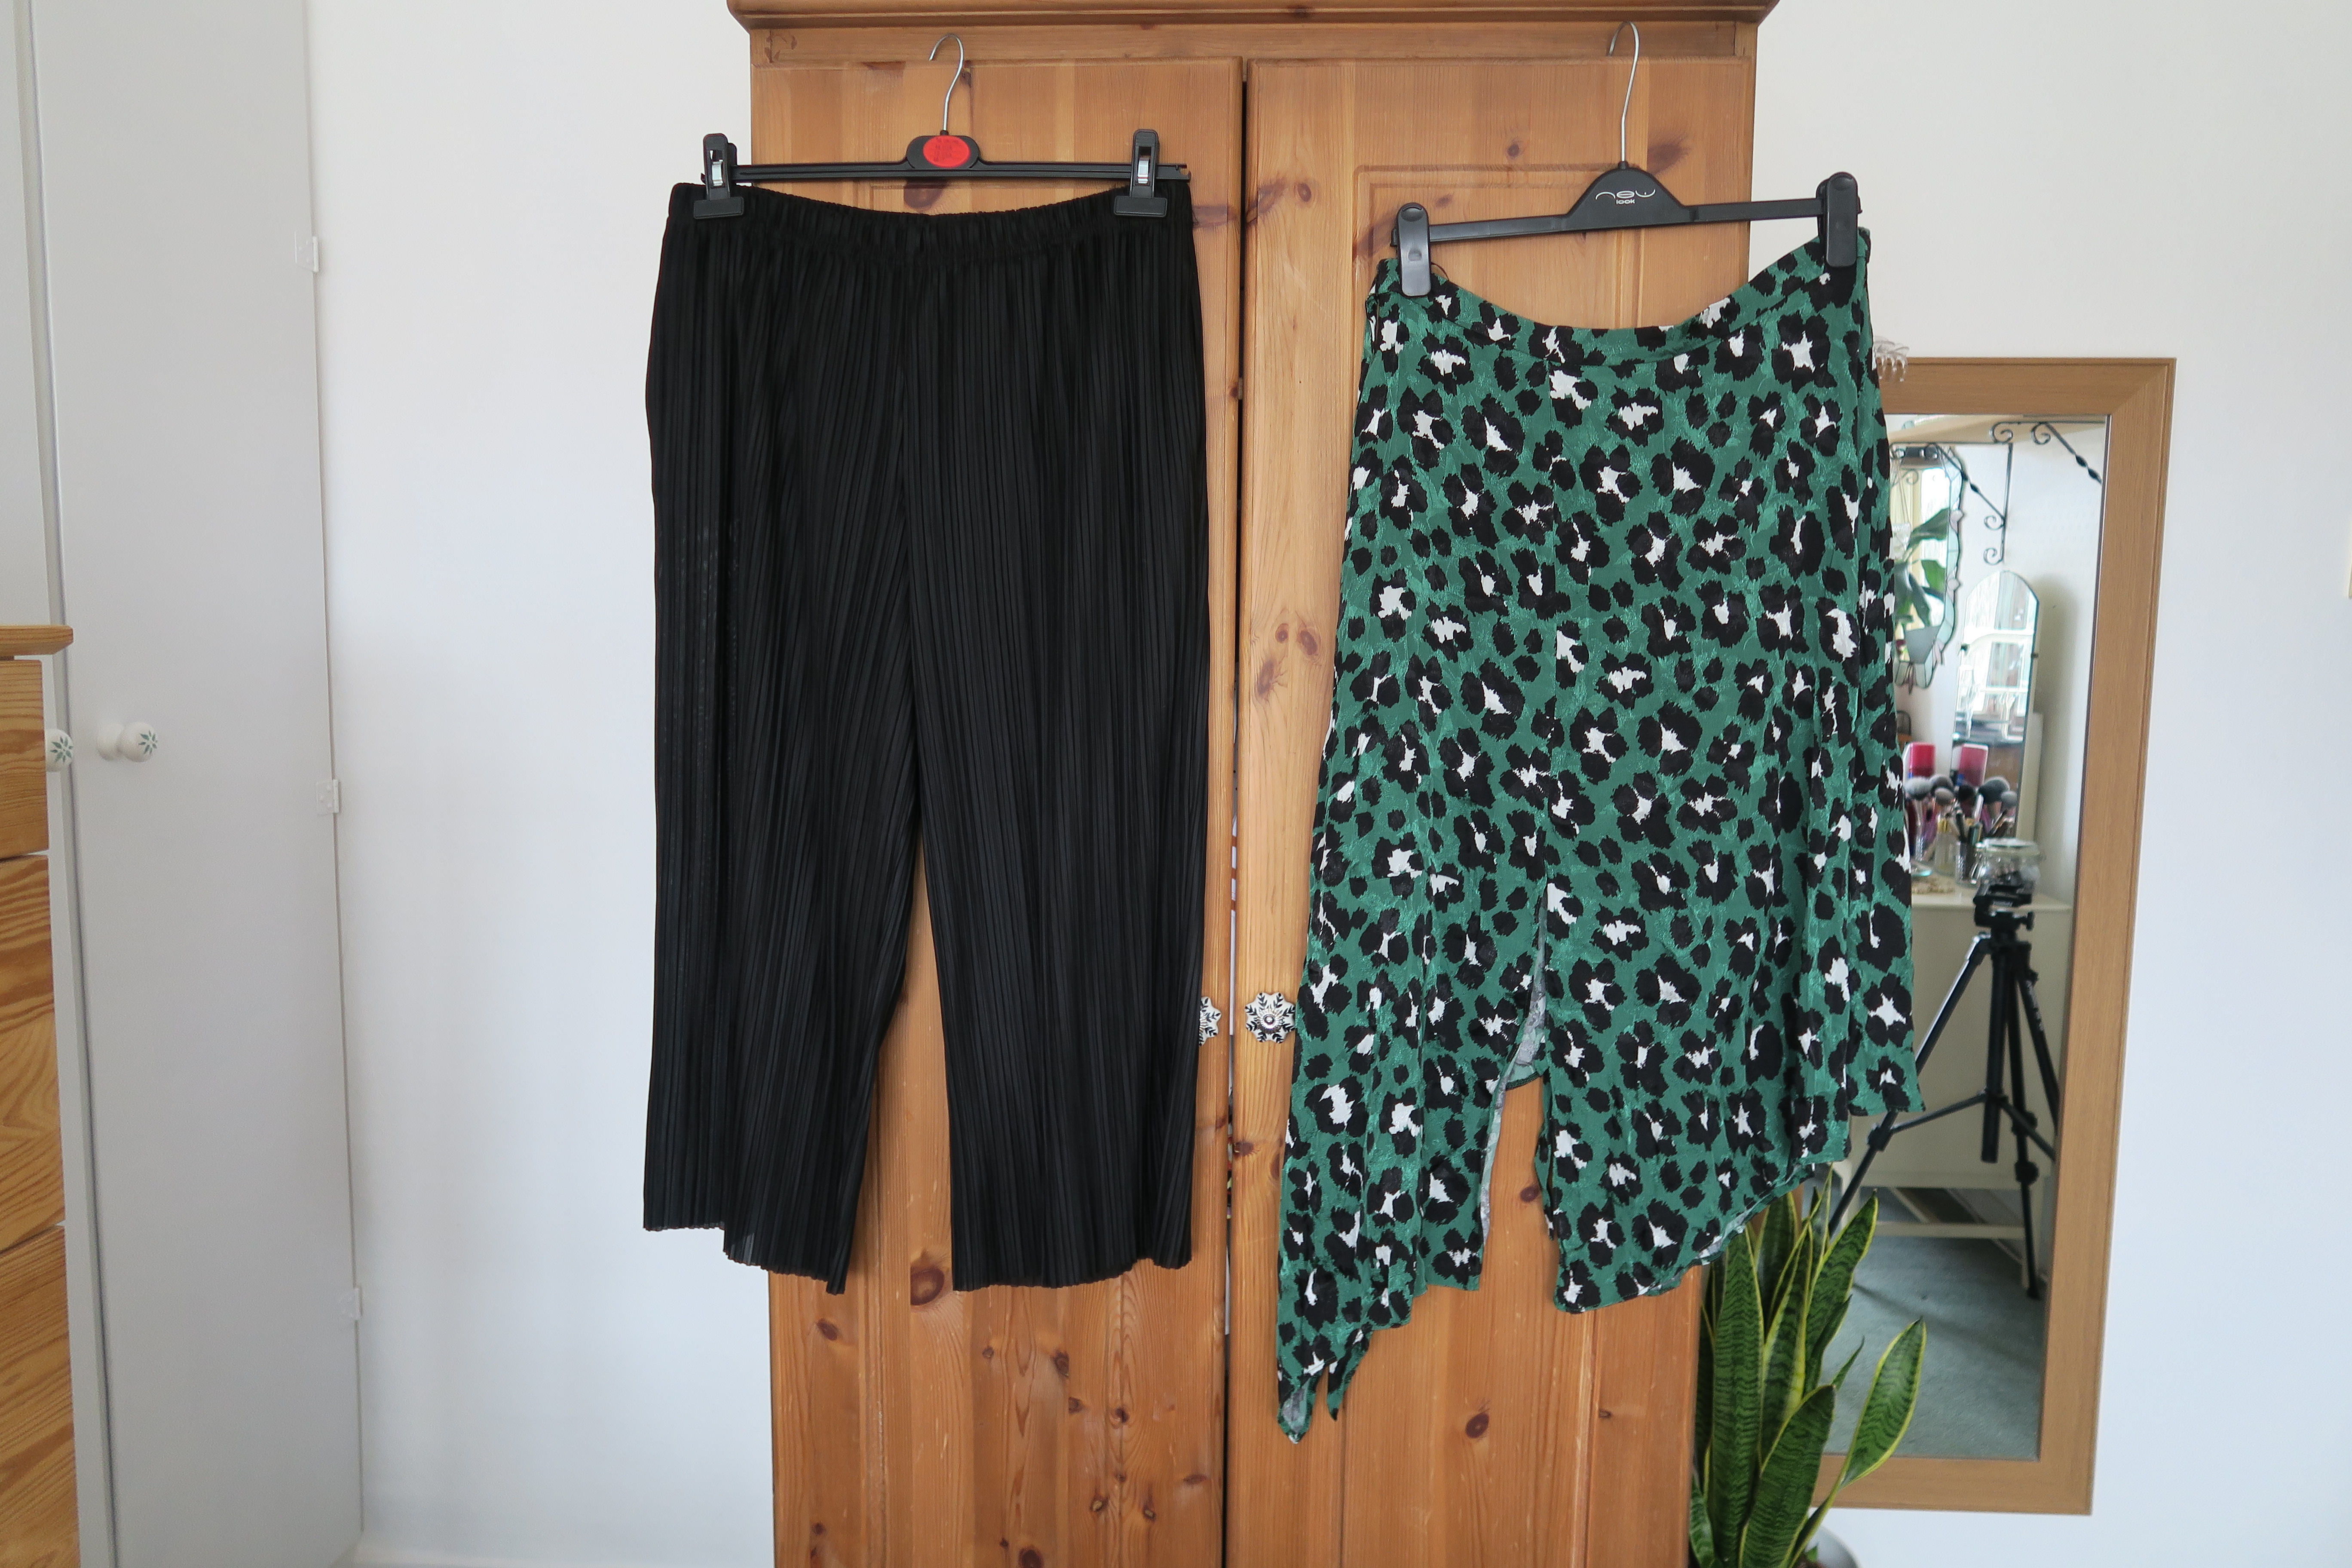 a pair of black culottes and a green skirt hanging from a wardrobe door